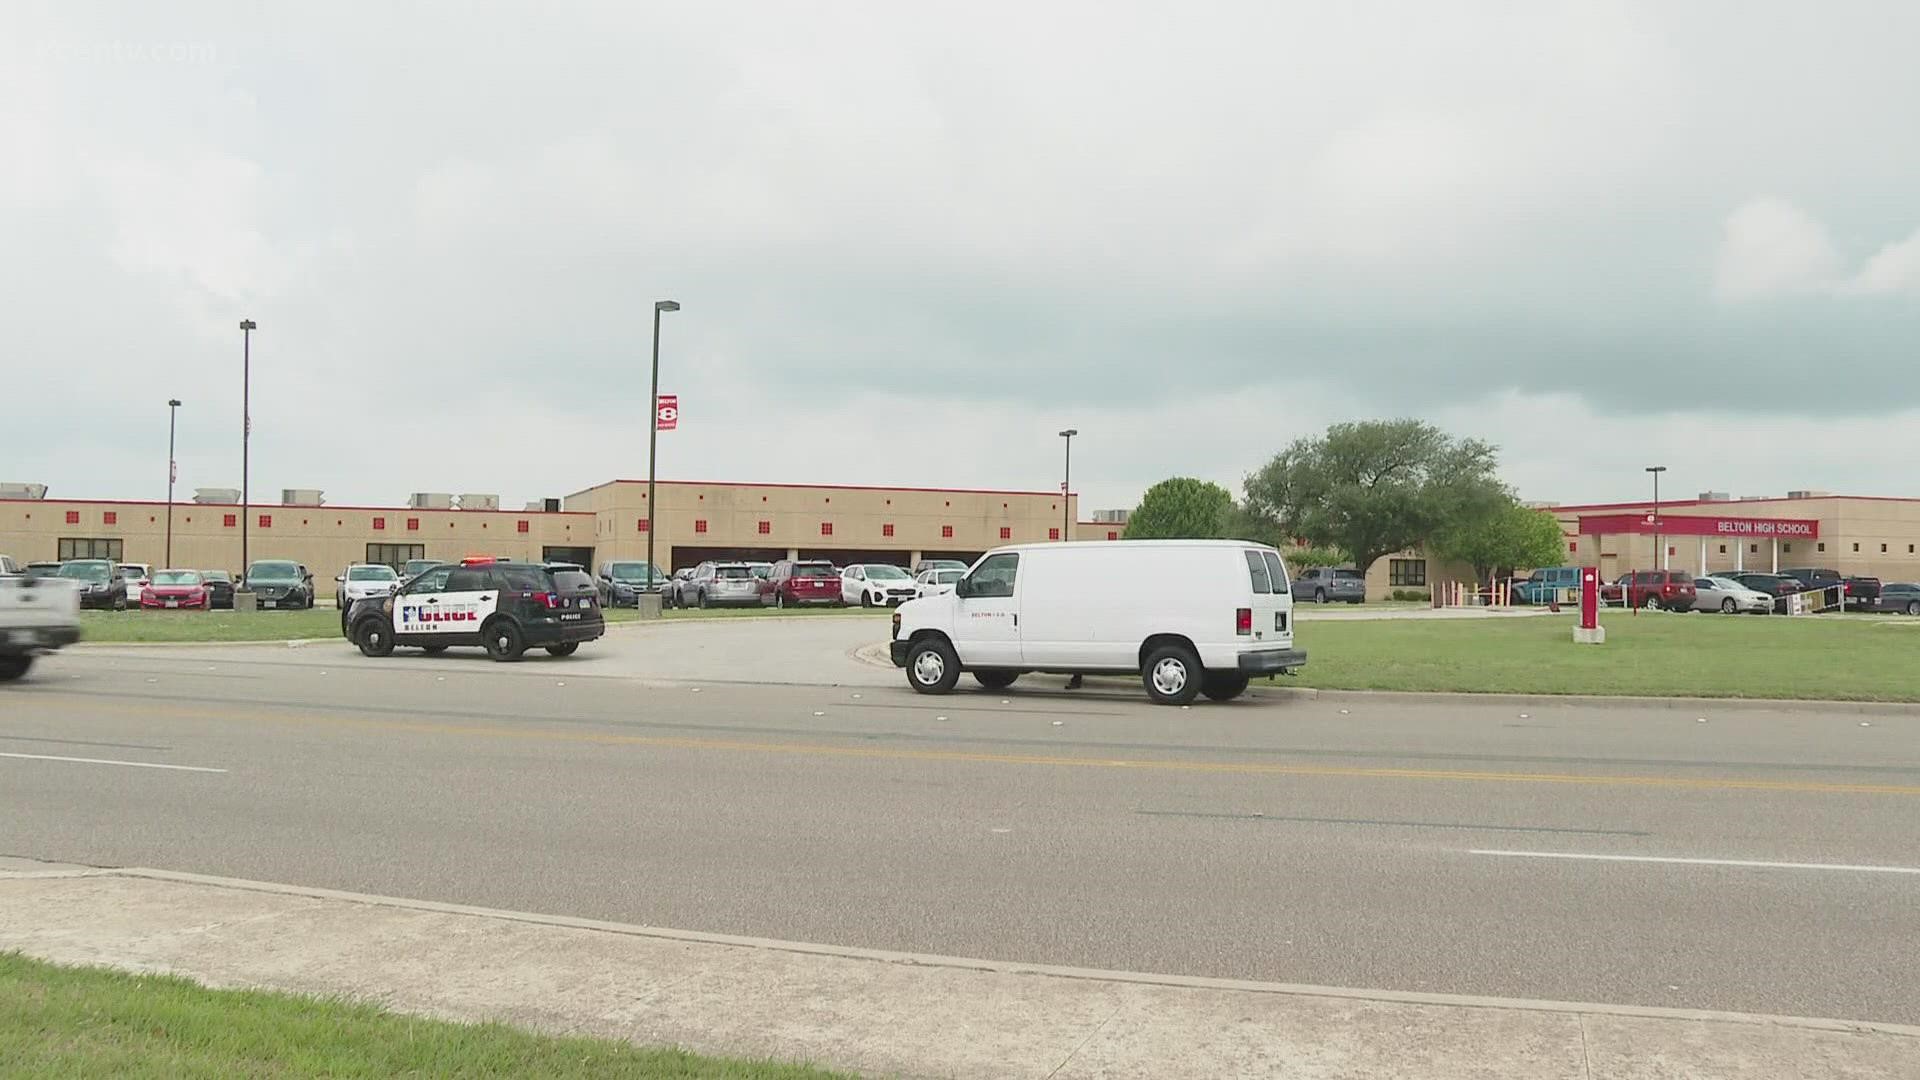 Family friends confirmed with 6 News that the student who was reportedly stabbed at Belton High School Tuesday morning has died.